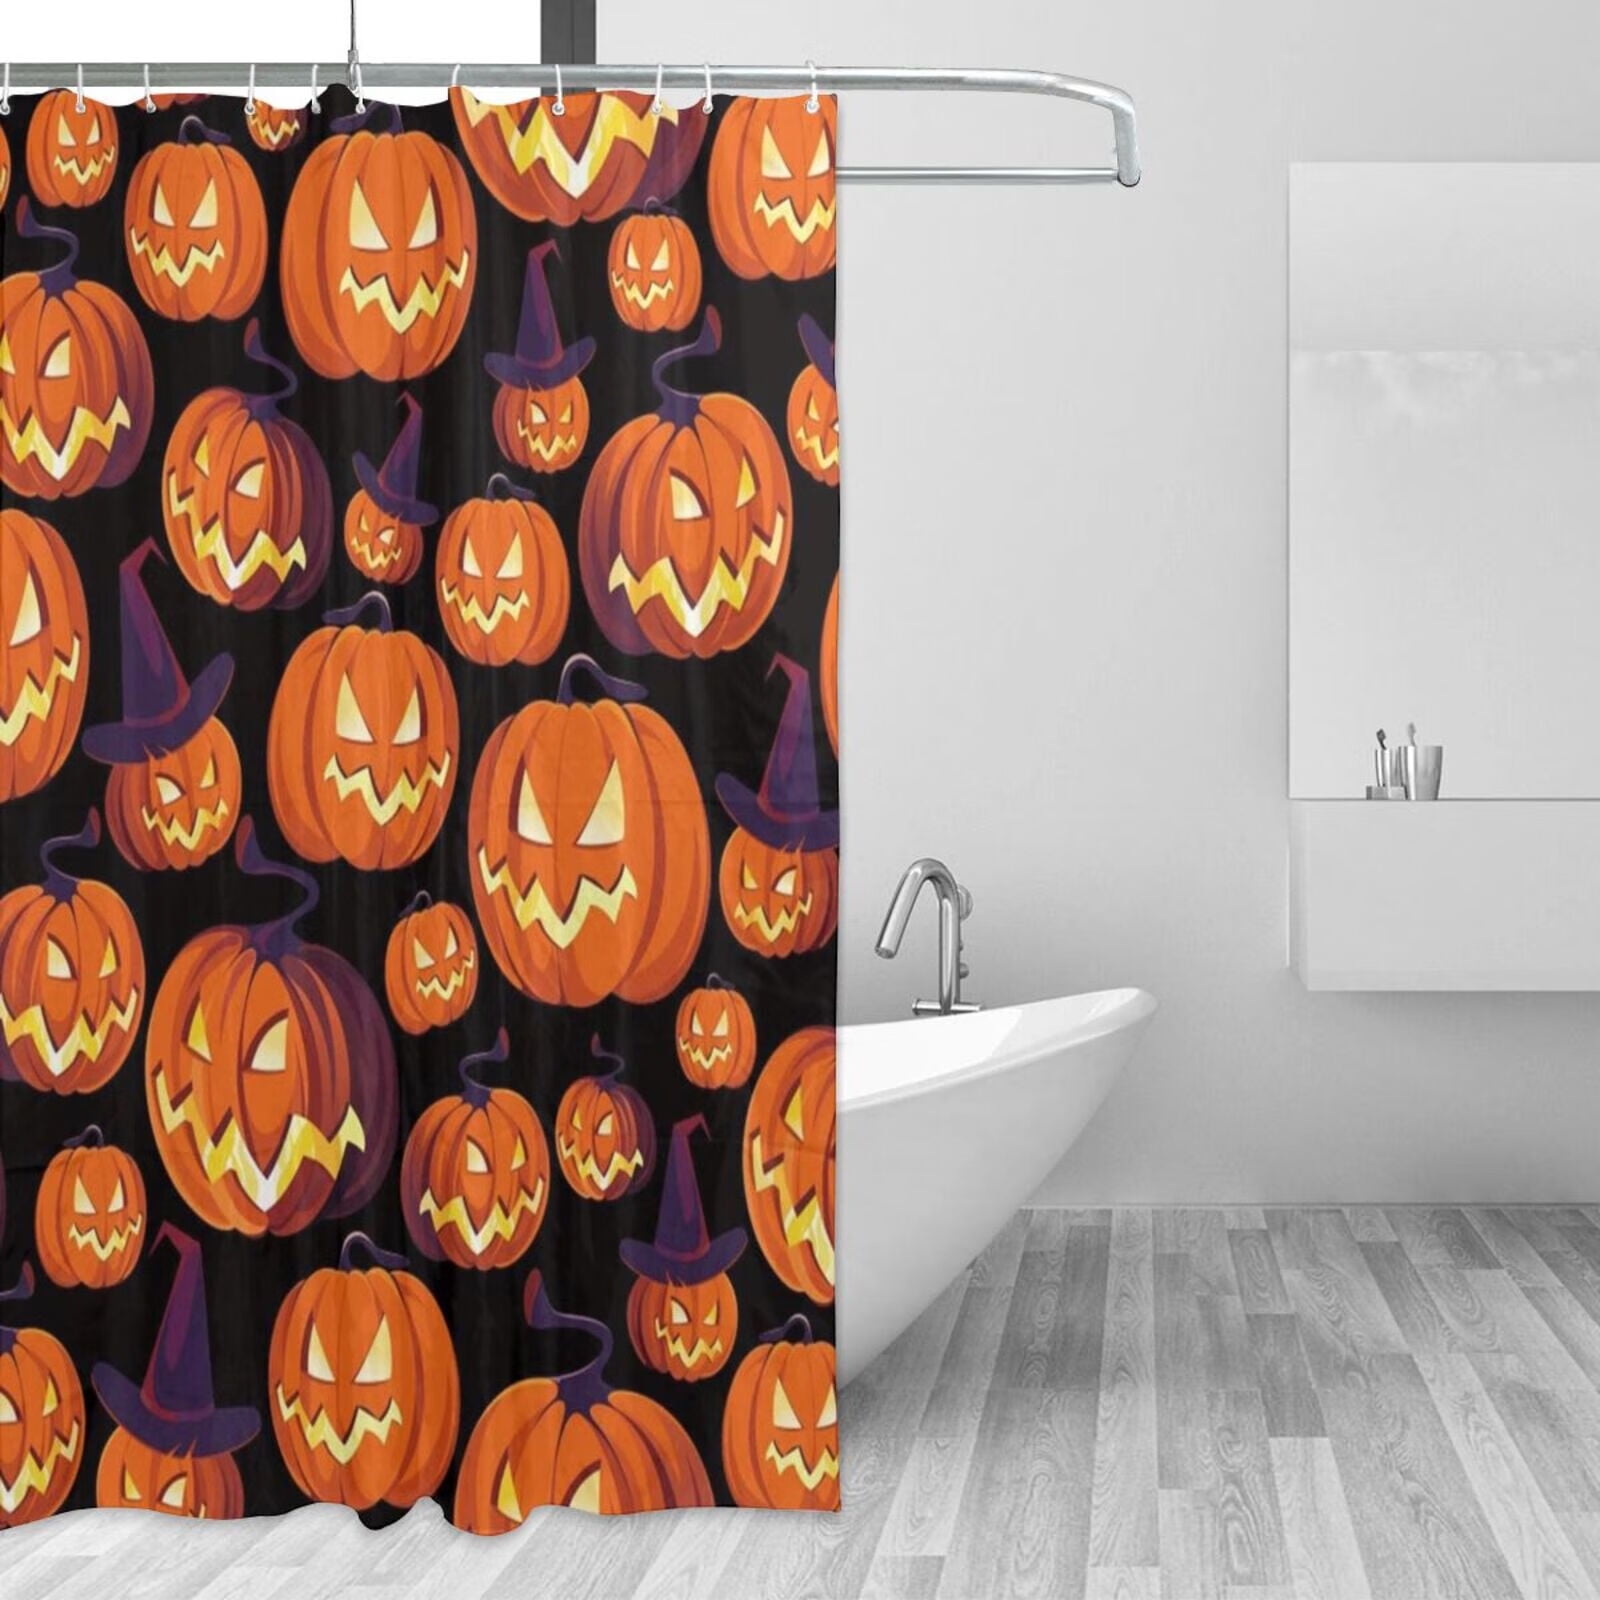  Livencher Bathroom Shower Curtains 48x72 Inch - Fabric  Waterproof Curtain with Hooks Washable Bath Curtain - Orange Luminous  Spider Web Halloween Shower Curtain Sets : Home & Kitchen